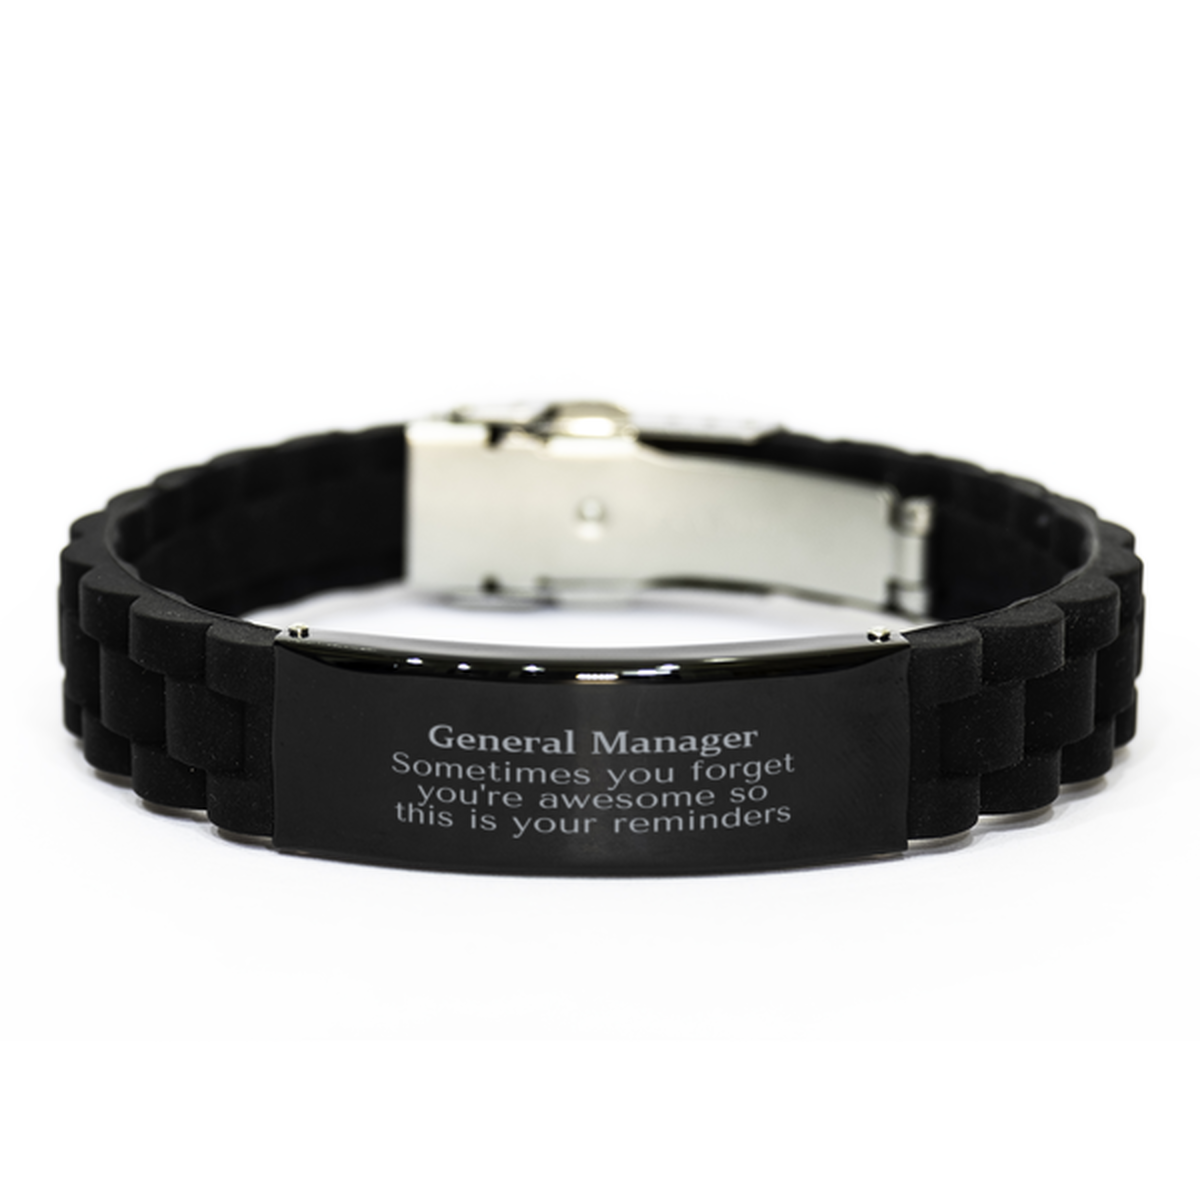 Sentimental General Manager Black Glidelock Clasp Bracelet, General Manager Sometimes you forget you're awesome so this is your reminders, Graduation Christmas Birthday Gifts for General Manager, Men, Women, Coworkers